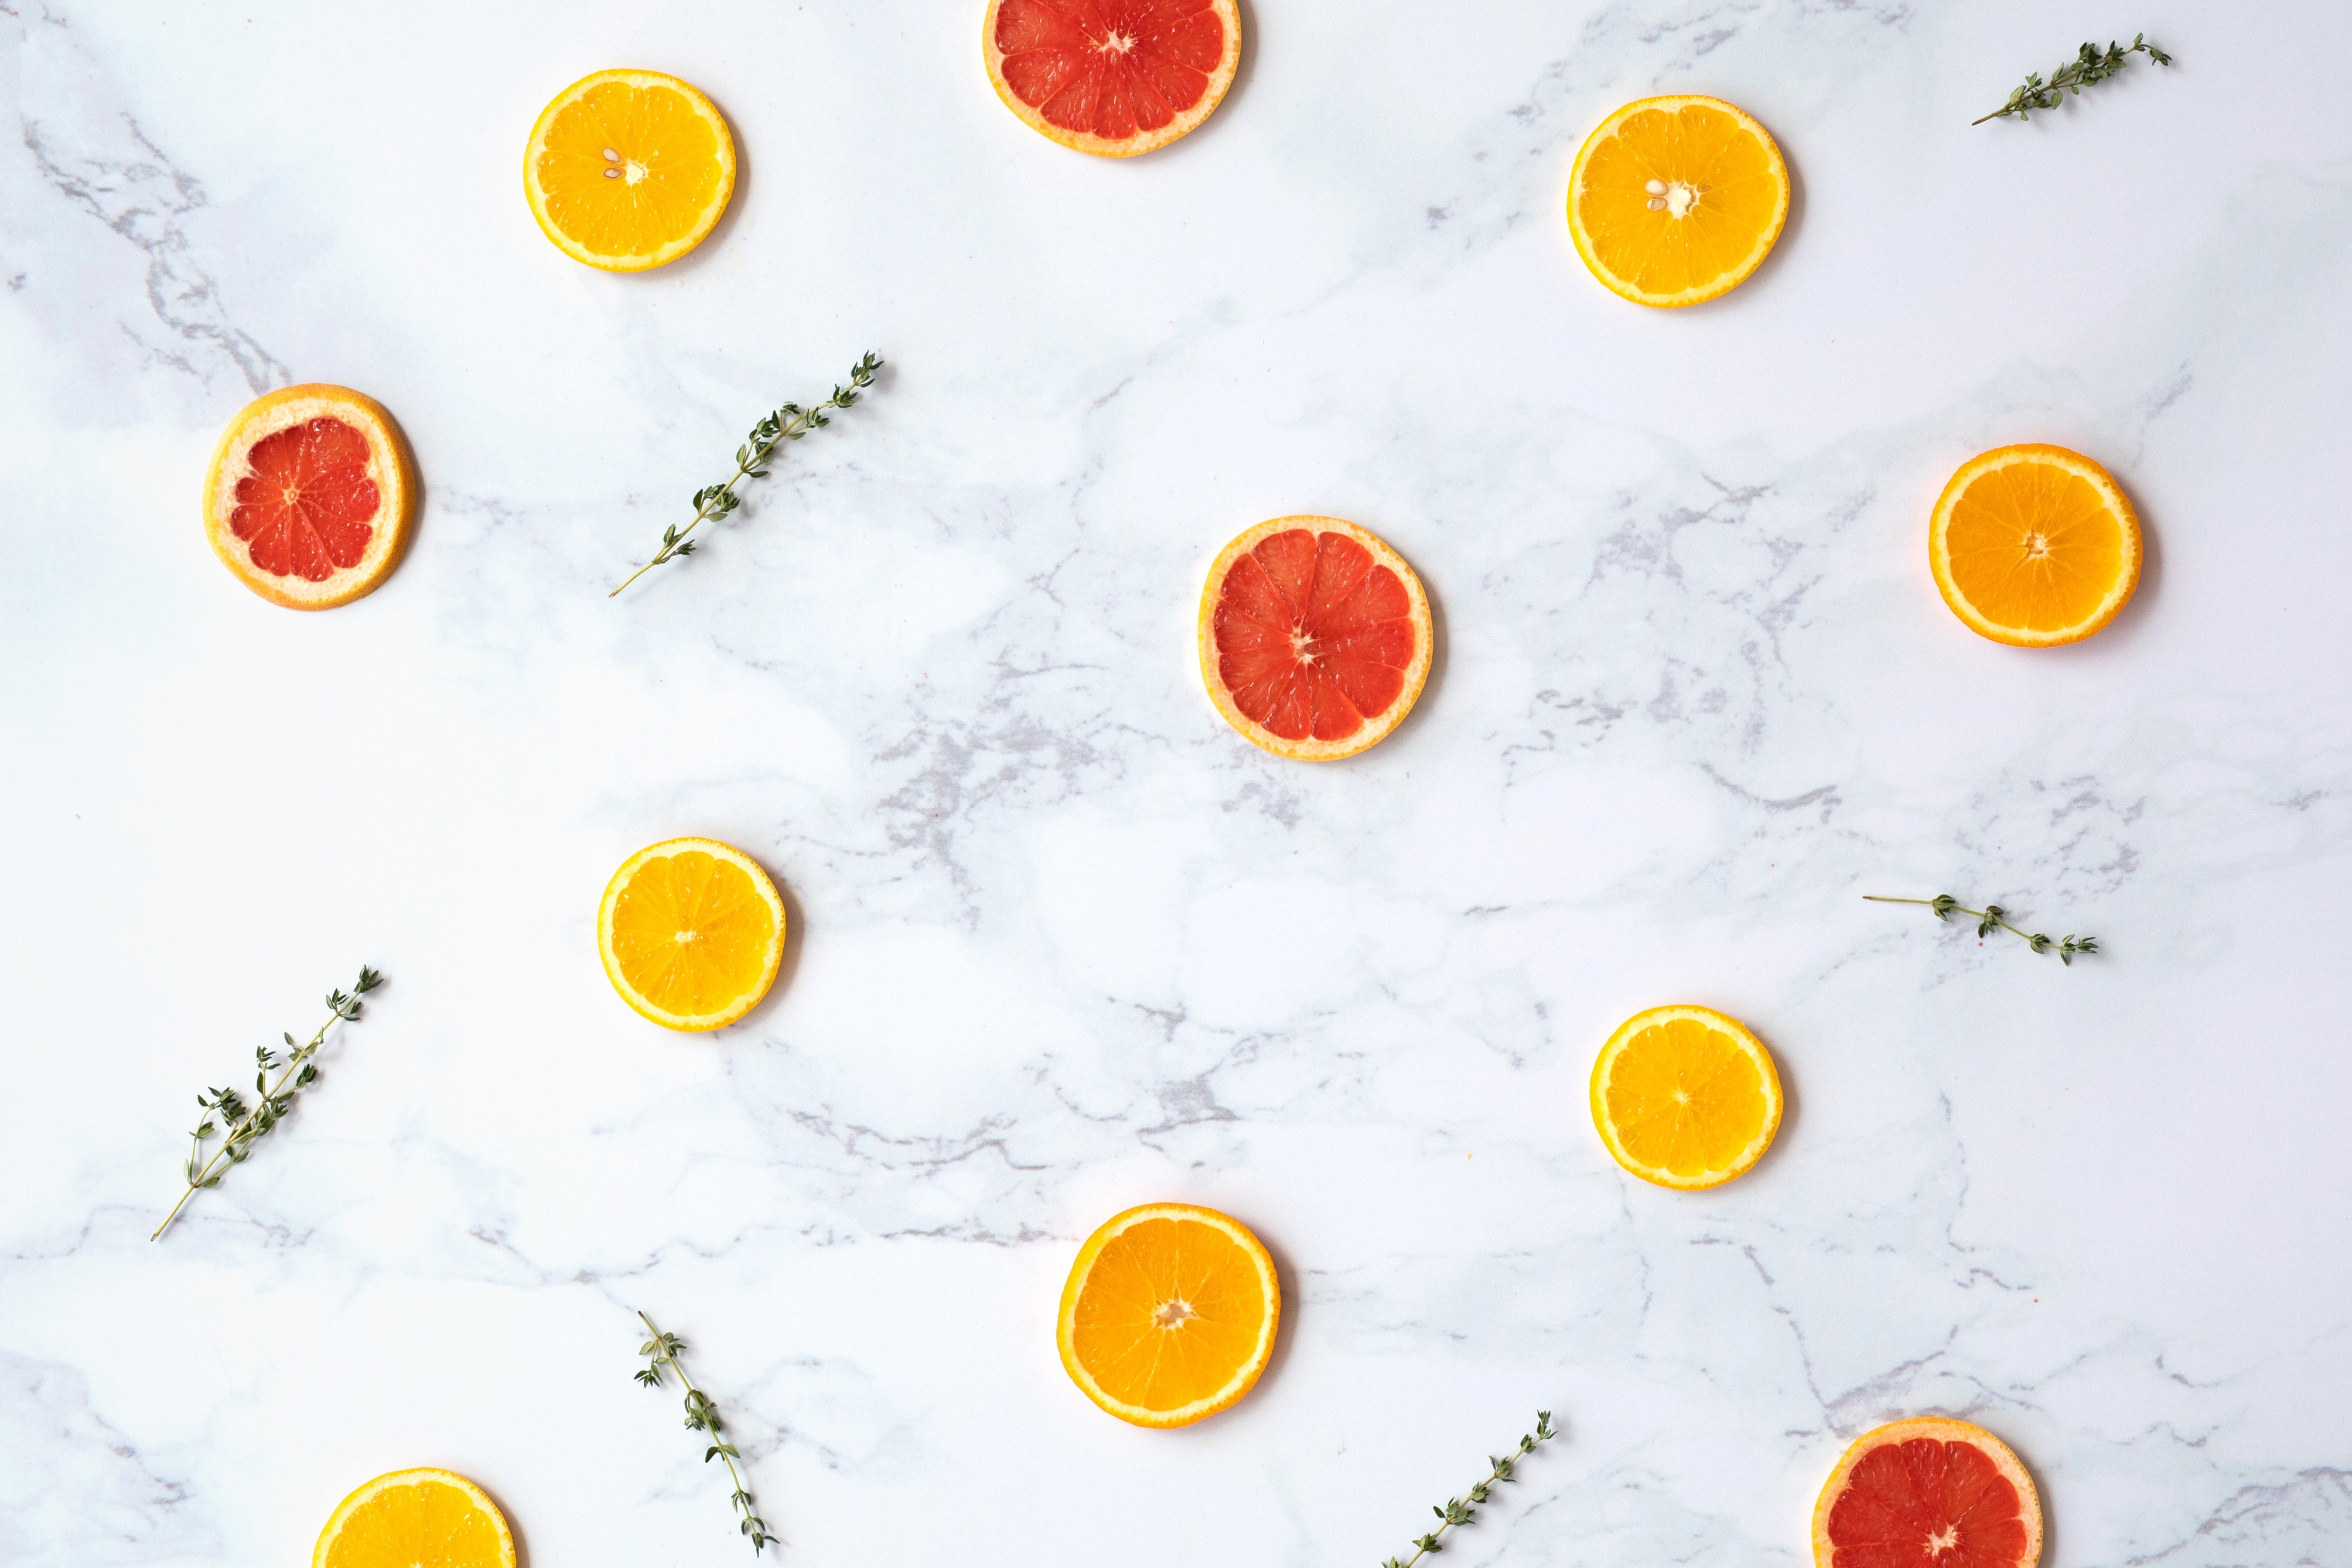 Flat lay photography of sliced citrus fruits on a marble surface